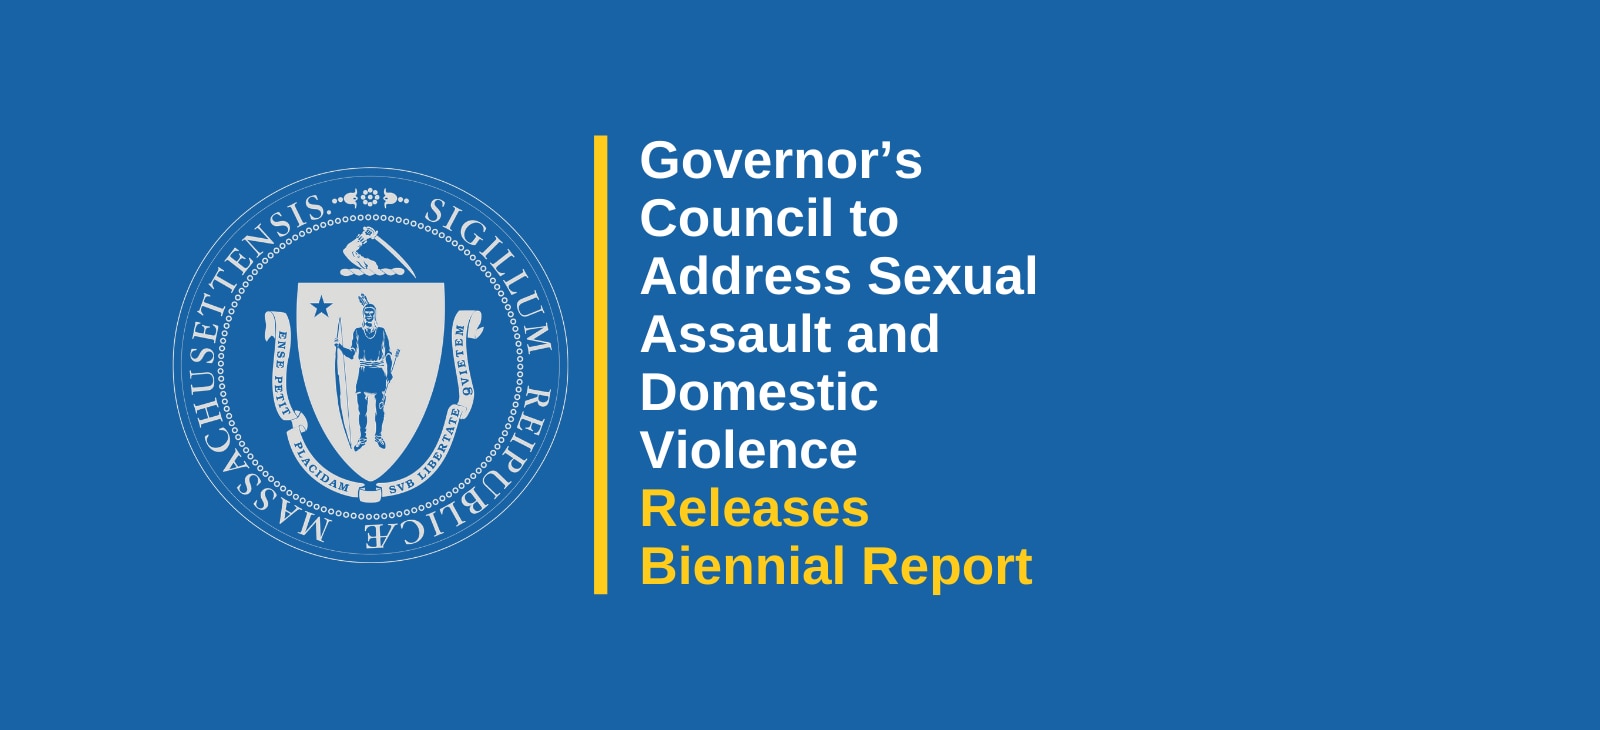 Governor’s Council to Address Sexual Assault and Domestic Violence Releases Biennial Report